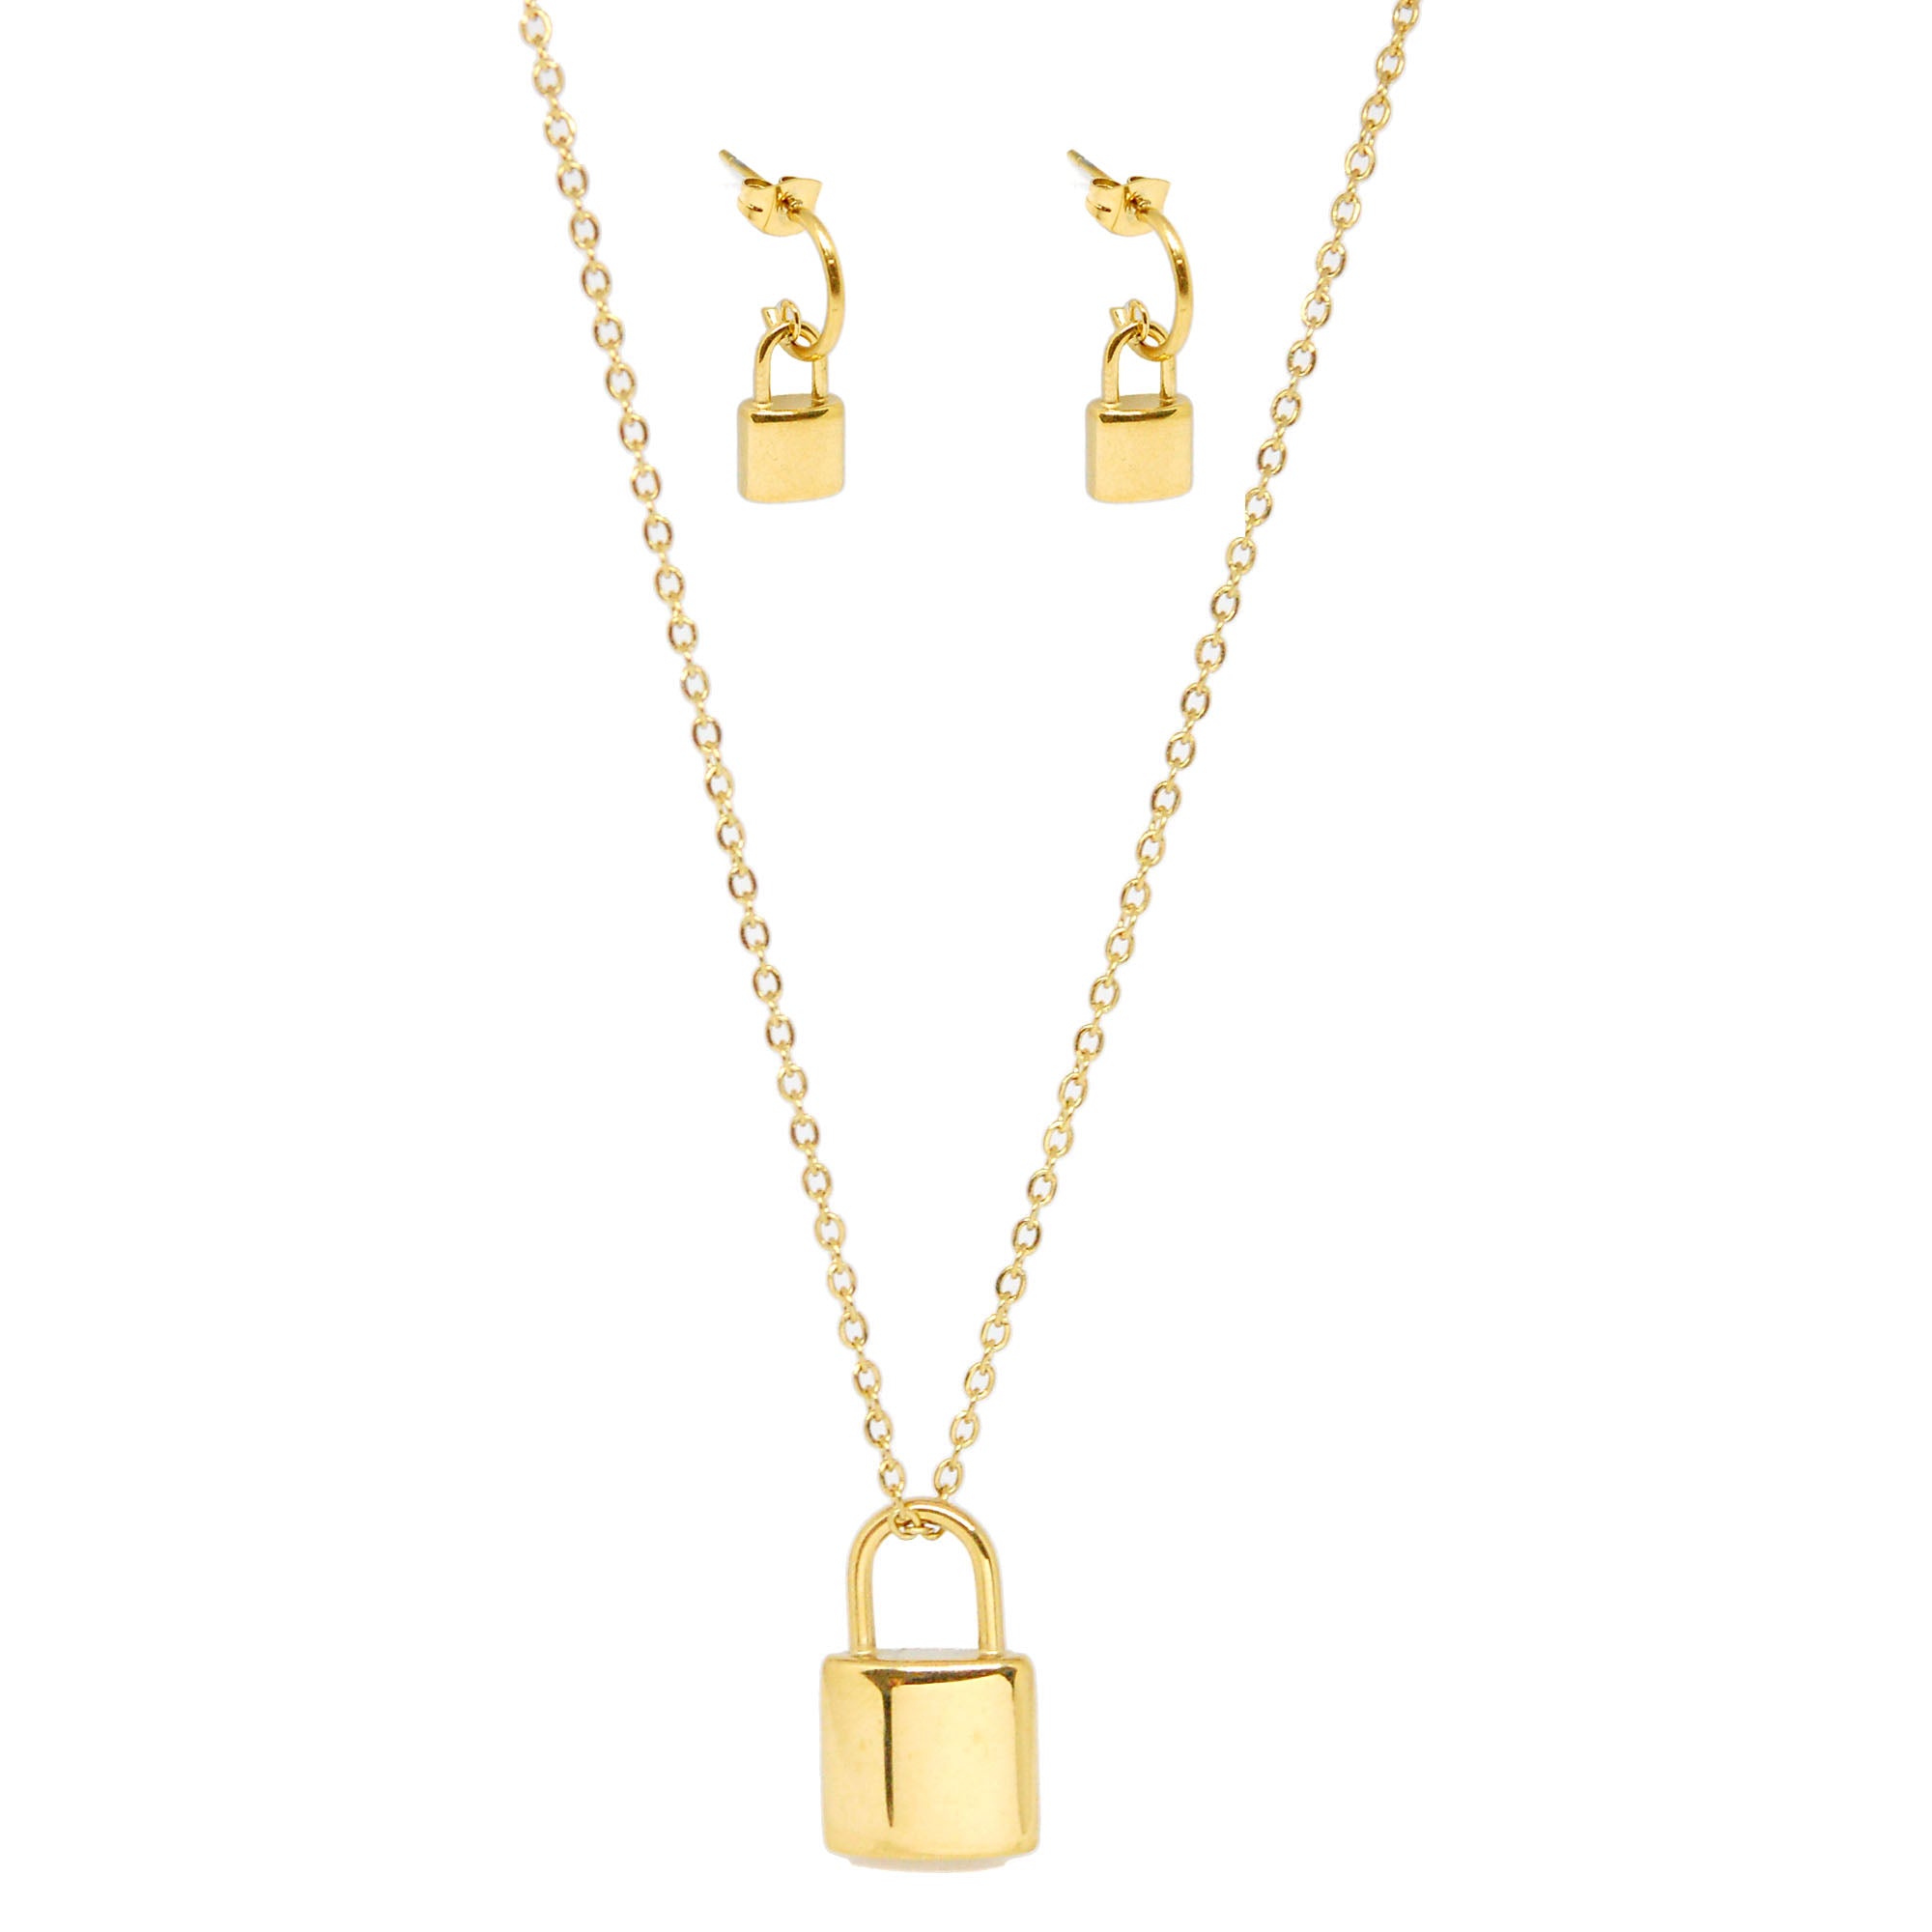 SET 7619: Gold Plated Dangling Lock Necklace & Earring Set